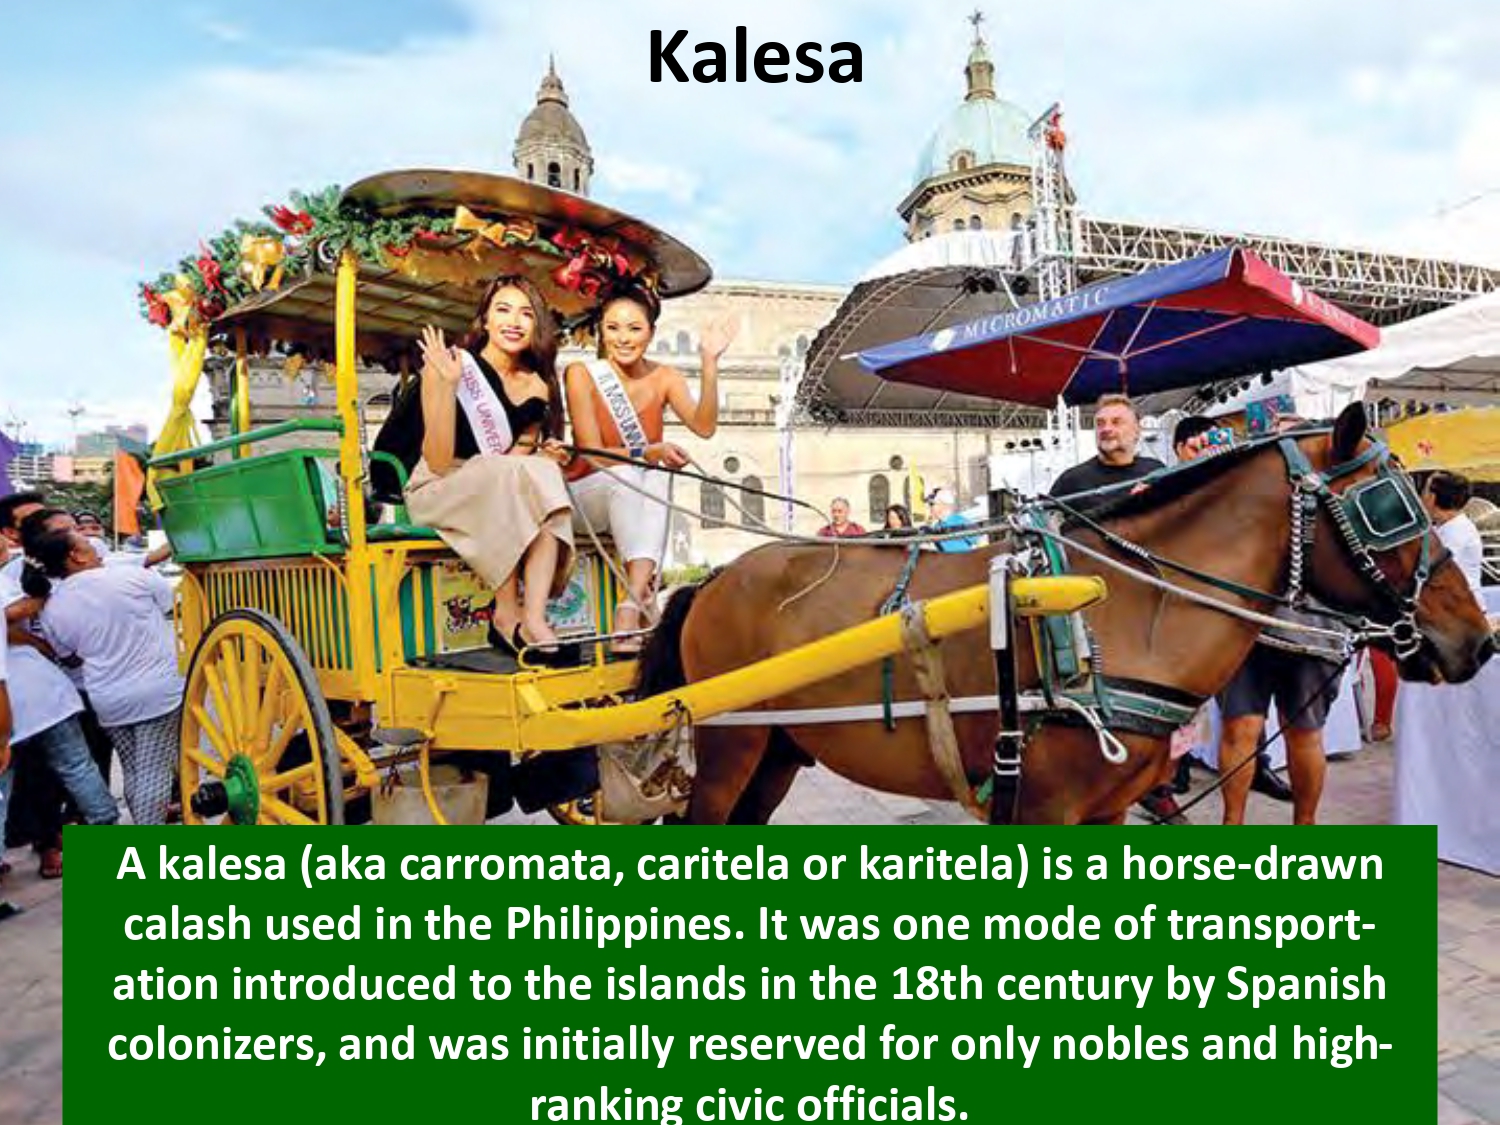 A kalesa (aka carromata, caritela or karitela) is a horse-drawn calash used in the Philippines. It was one mode of transportation introduced to the islands in the 18th century by Spanish colonizers, and was initially reserved for only nobles and highranking civic officials.